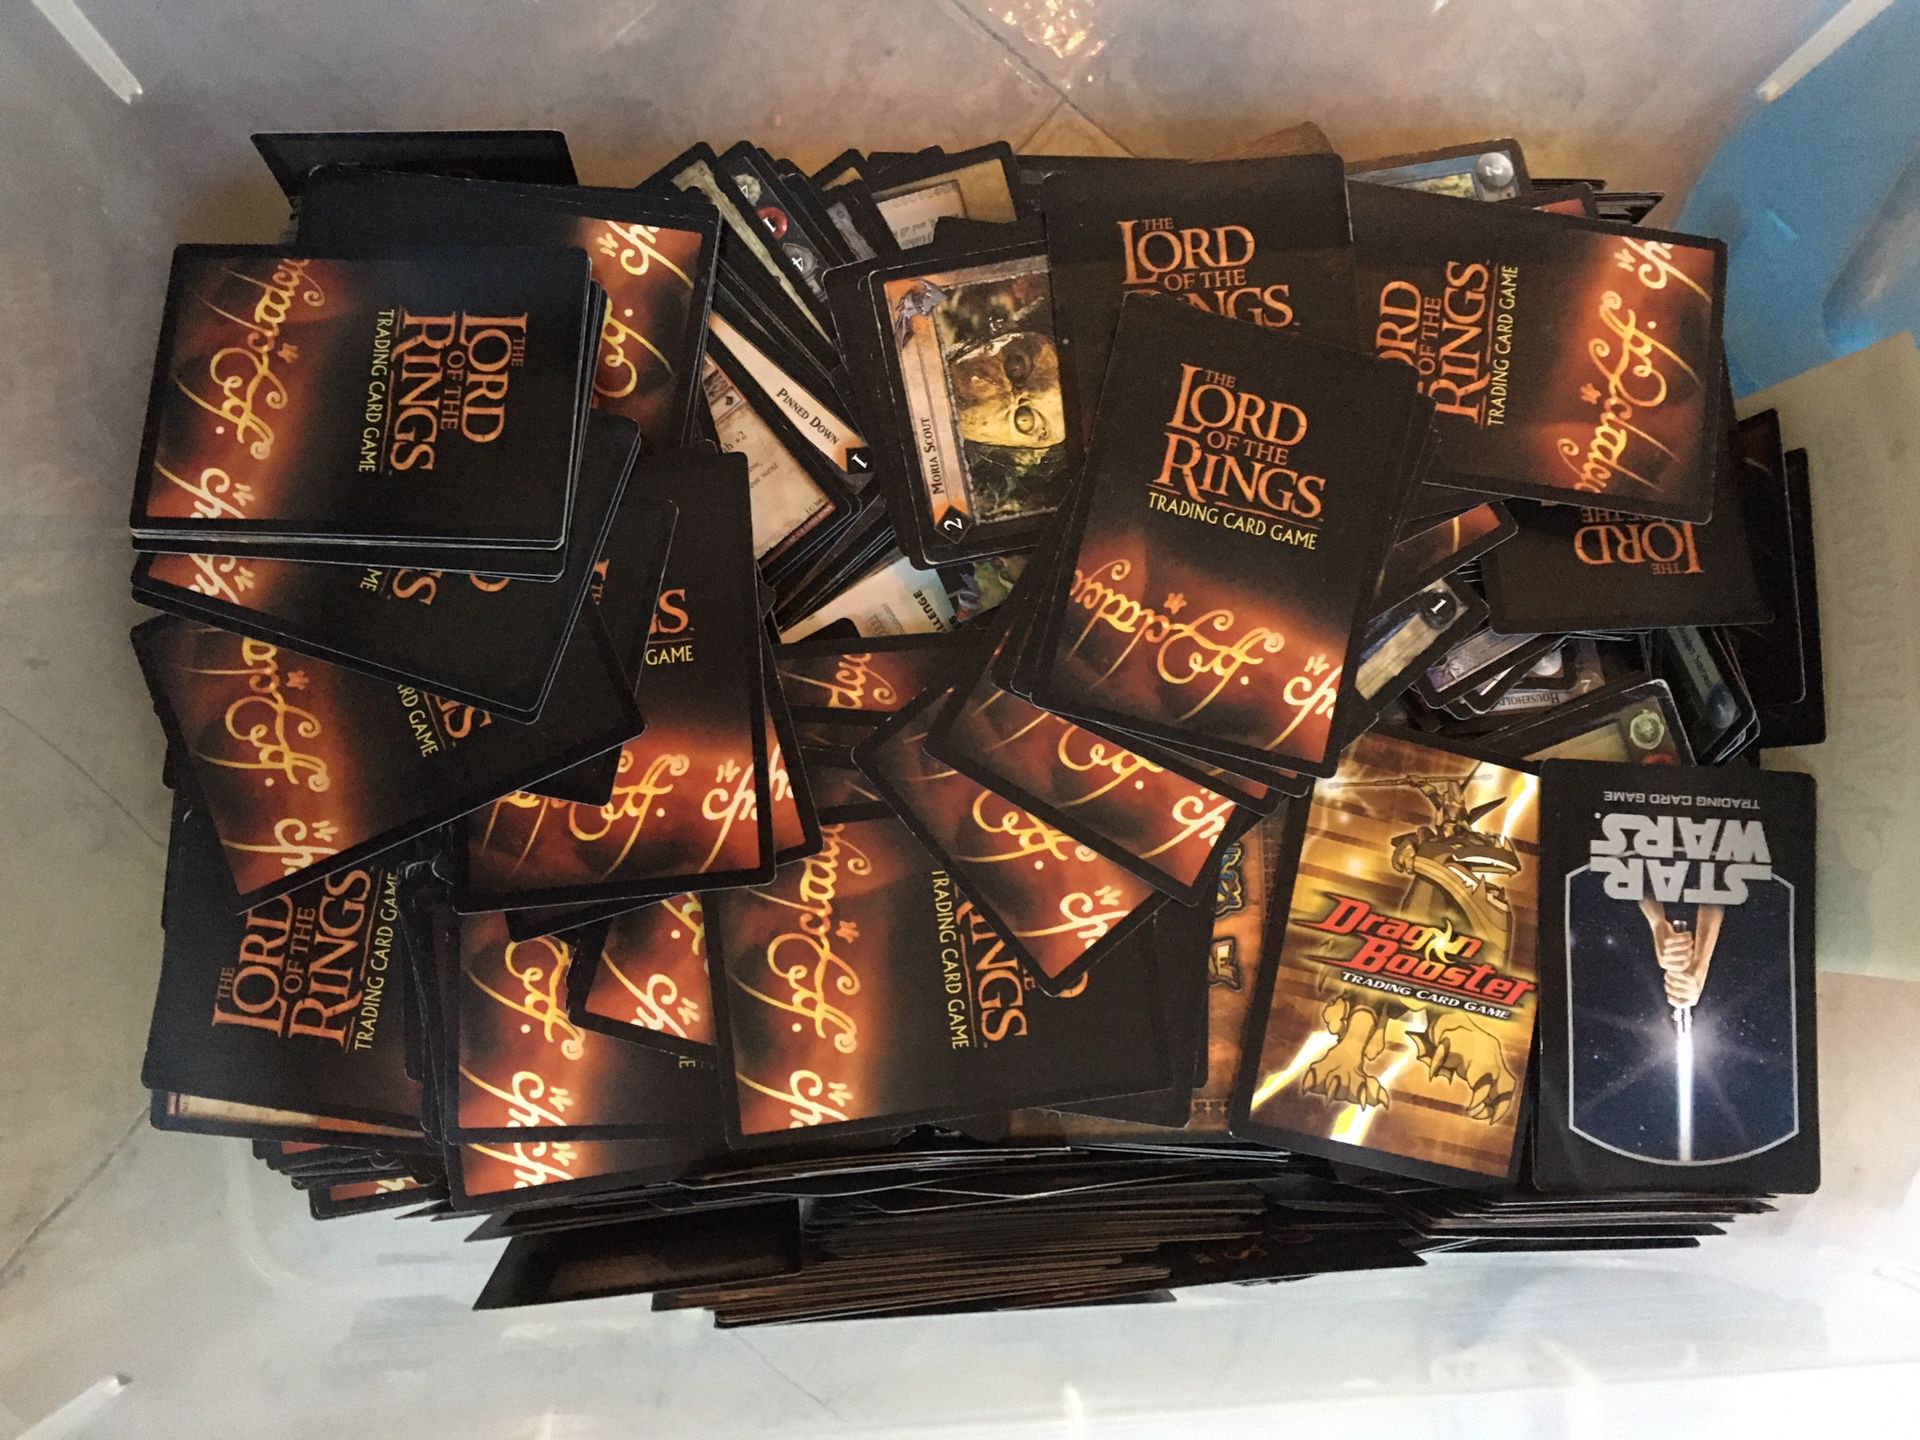 Lot of over 500 Lord of the Rings trading cards in medium played condition